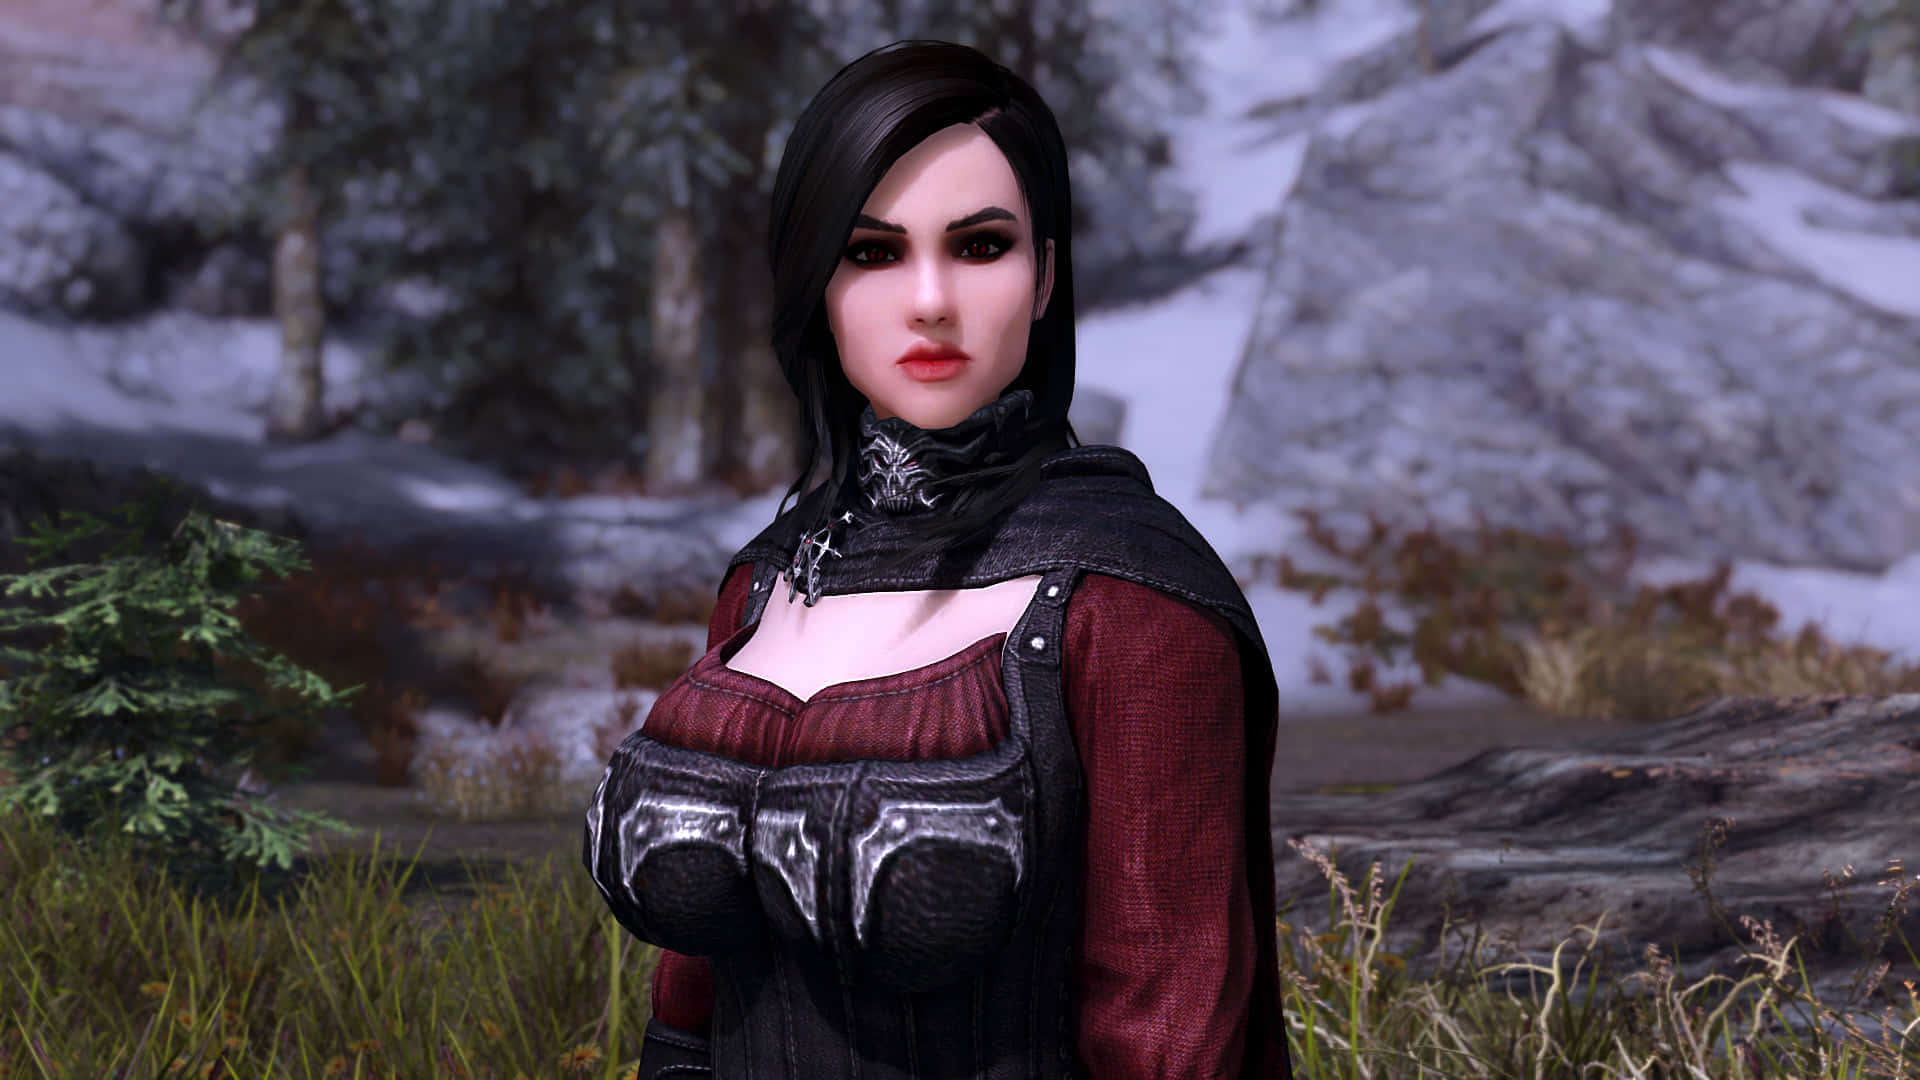 Serana, the powerful vampire from Skyrim, standing in the mystical world of Tamriel. Wallpaper